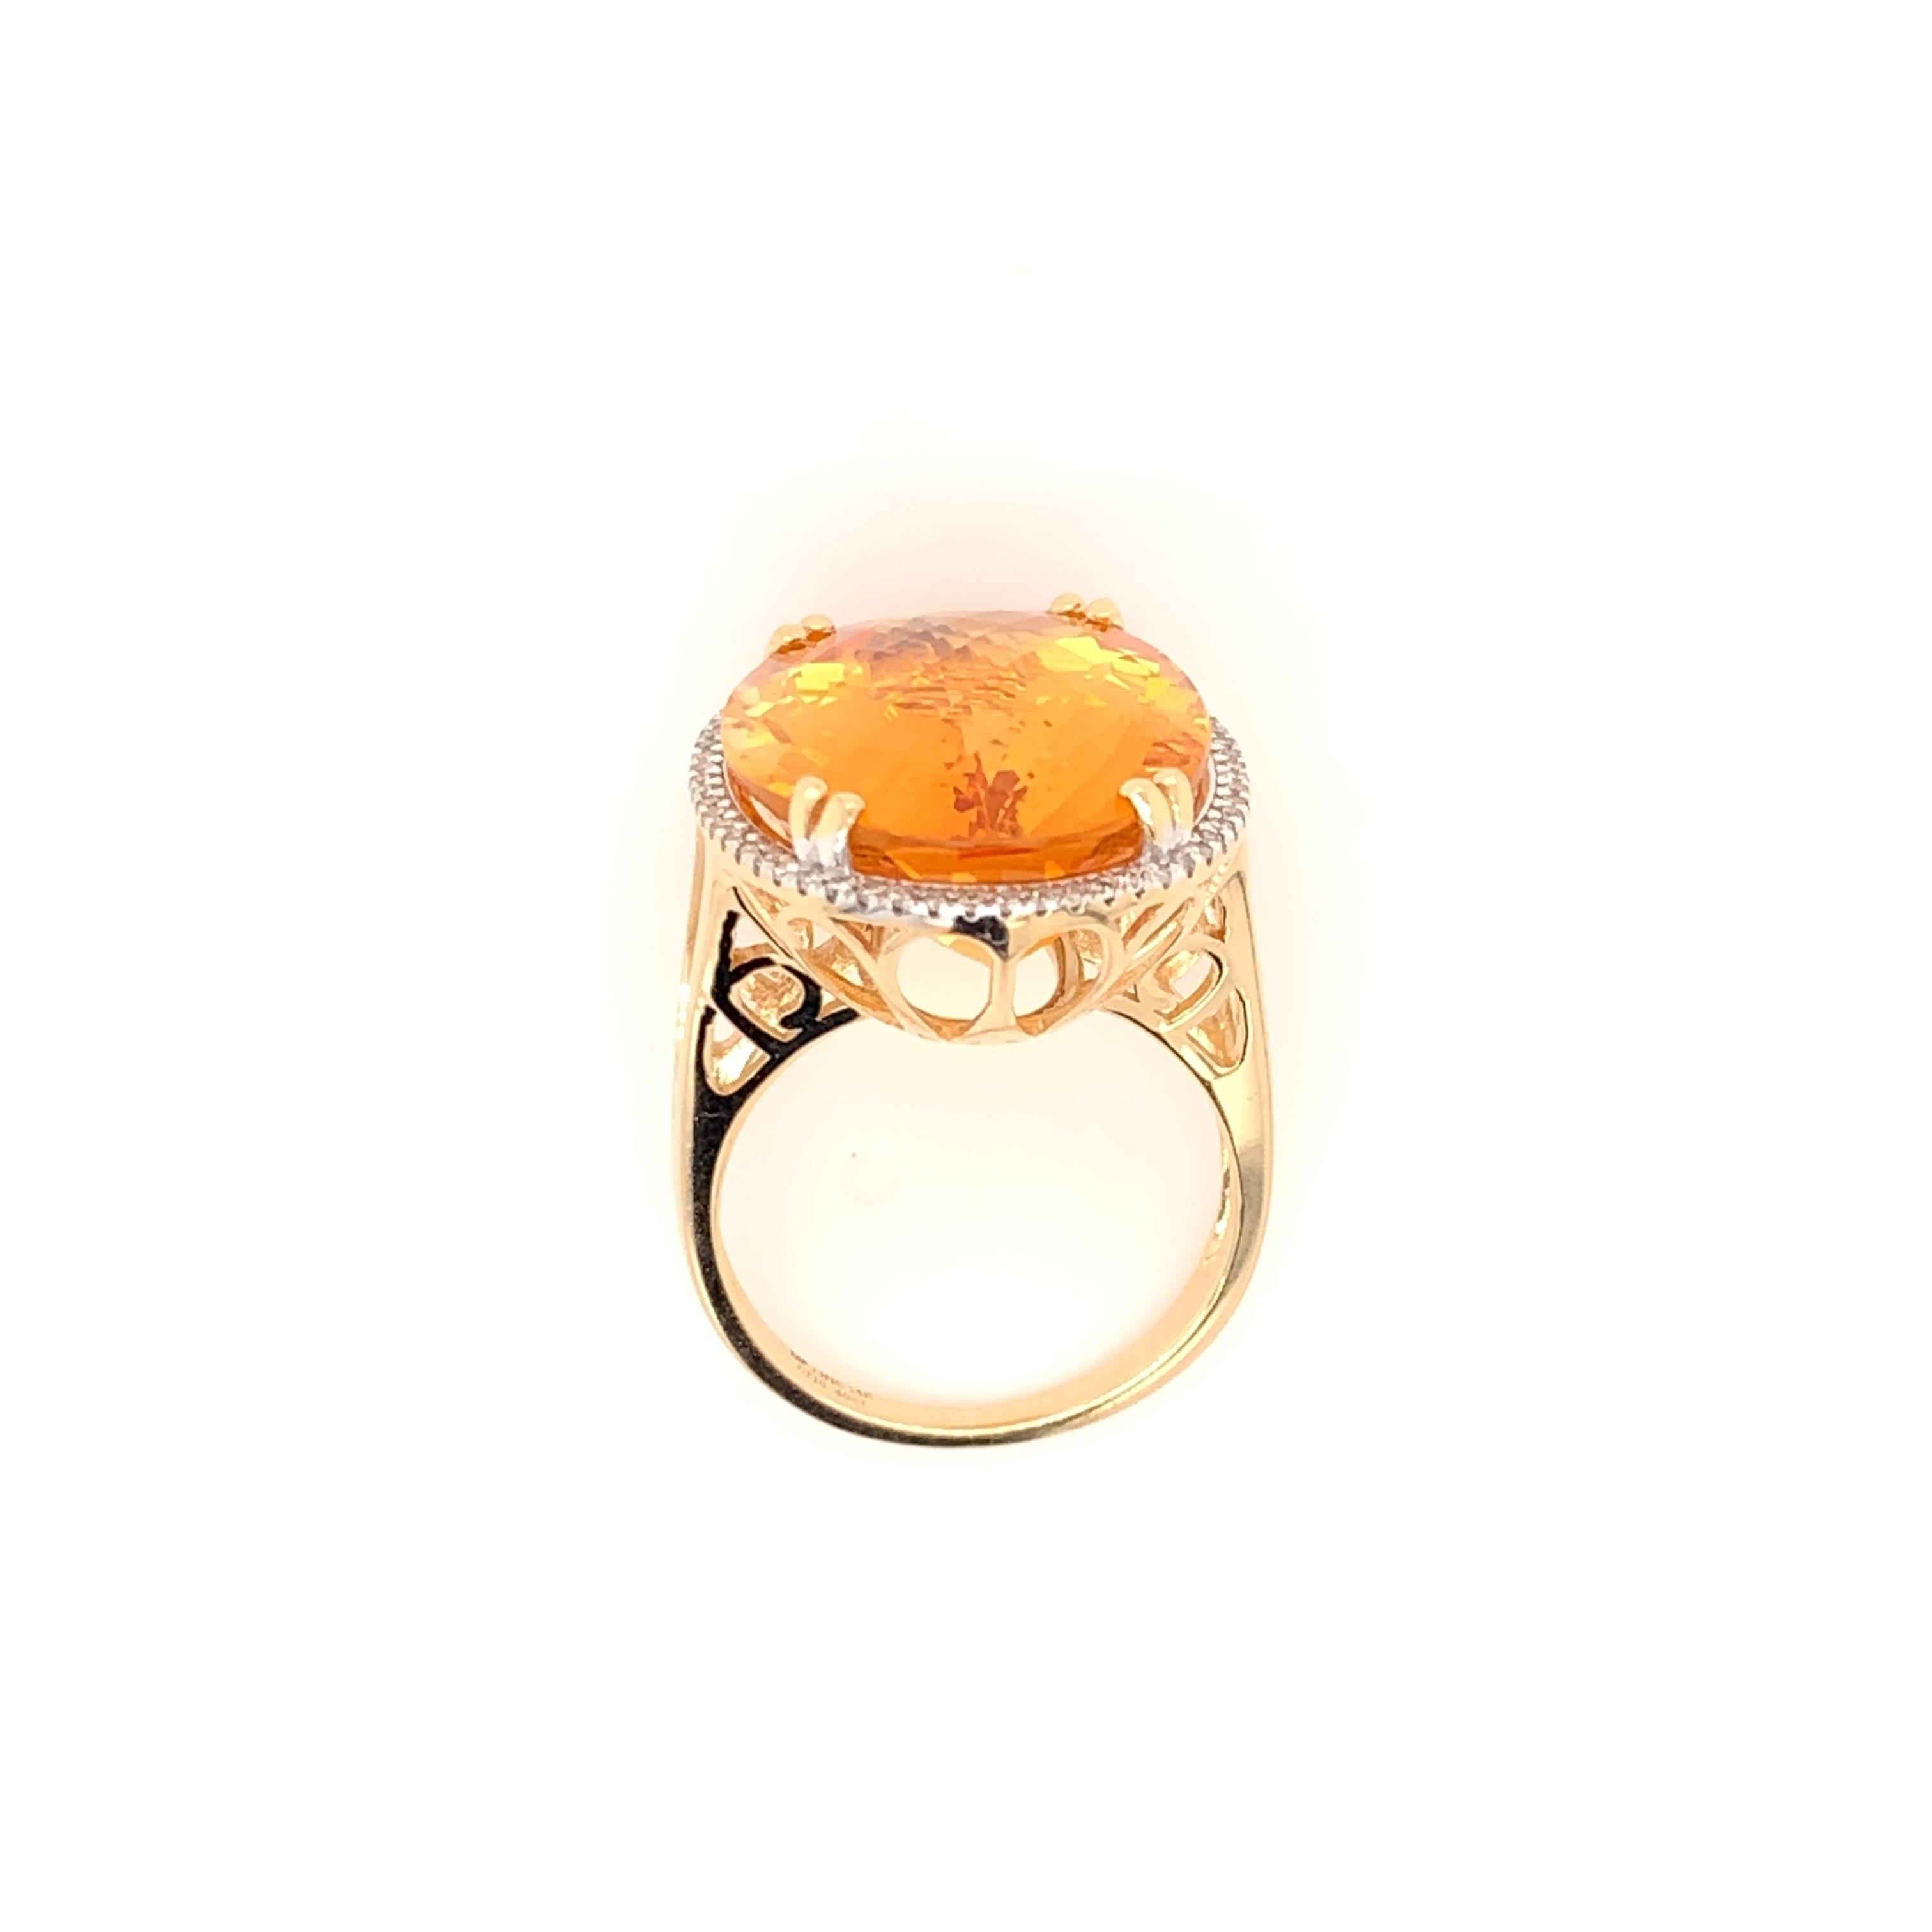 Contemporary 15.45 Carat Citrine Cocktail Ring